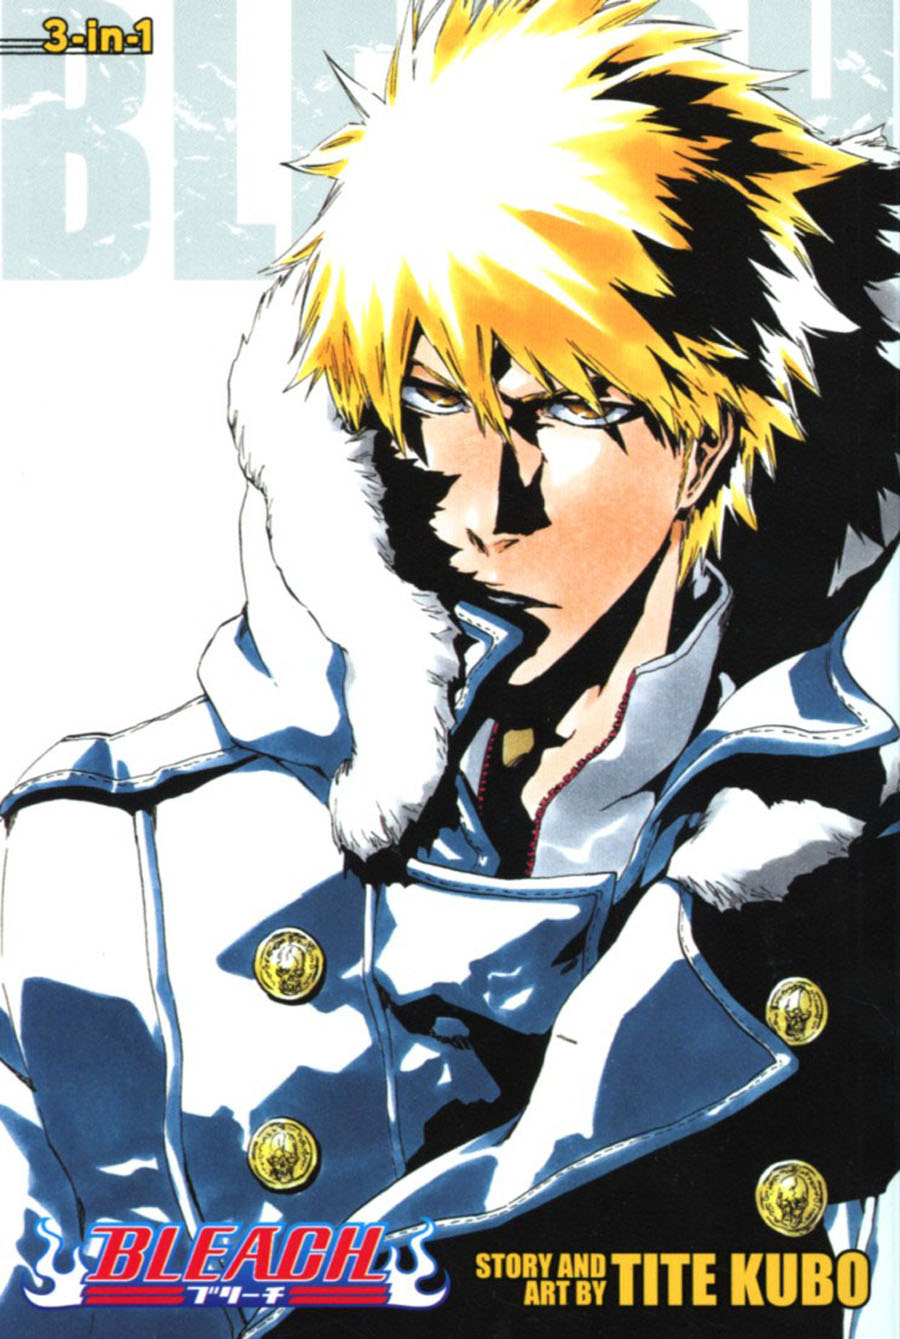 Bleach 3-In-1 Edition Vols 49 - 50 - 51 TP